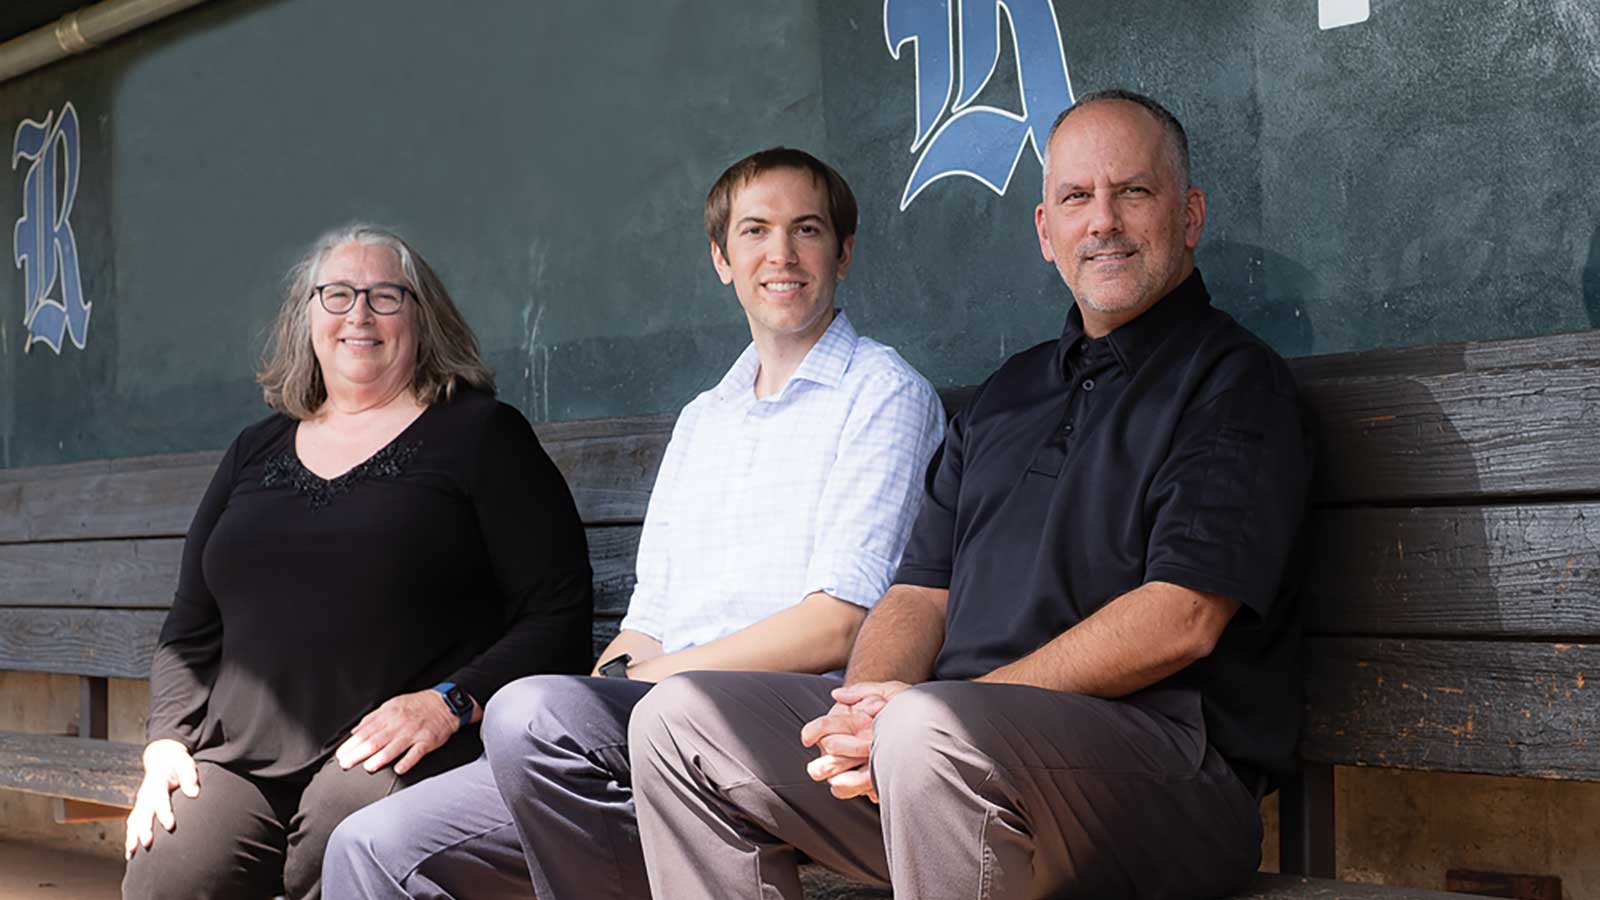 Statistics professors Kathy Ensor and Dan Kowal, and Clark Haptonstall, chair and a professor in the practice of sport management at Rice, sit in the dugout at Reckling Park, the university’s baseball field.